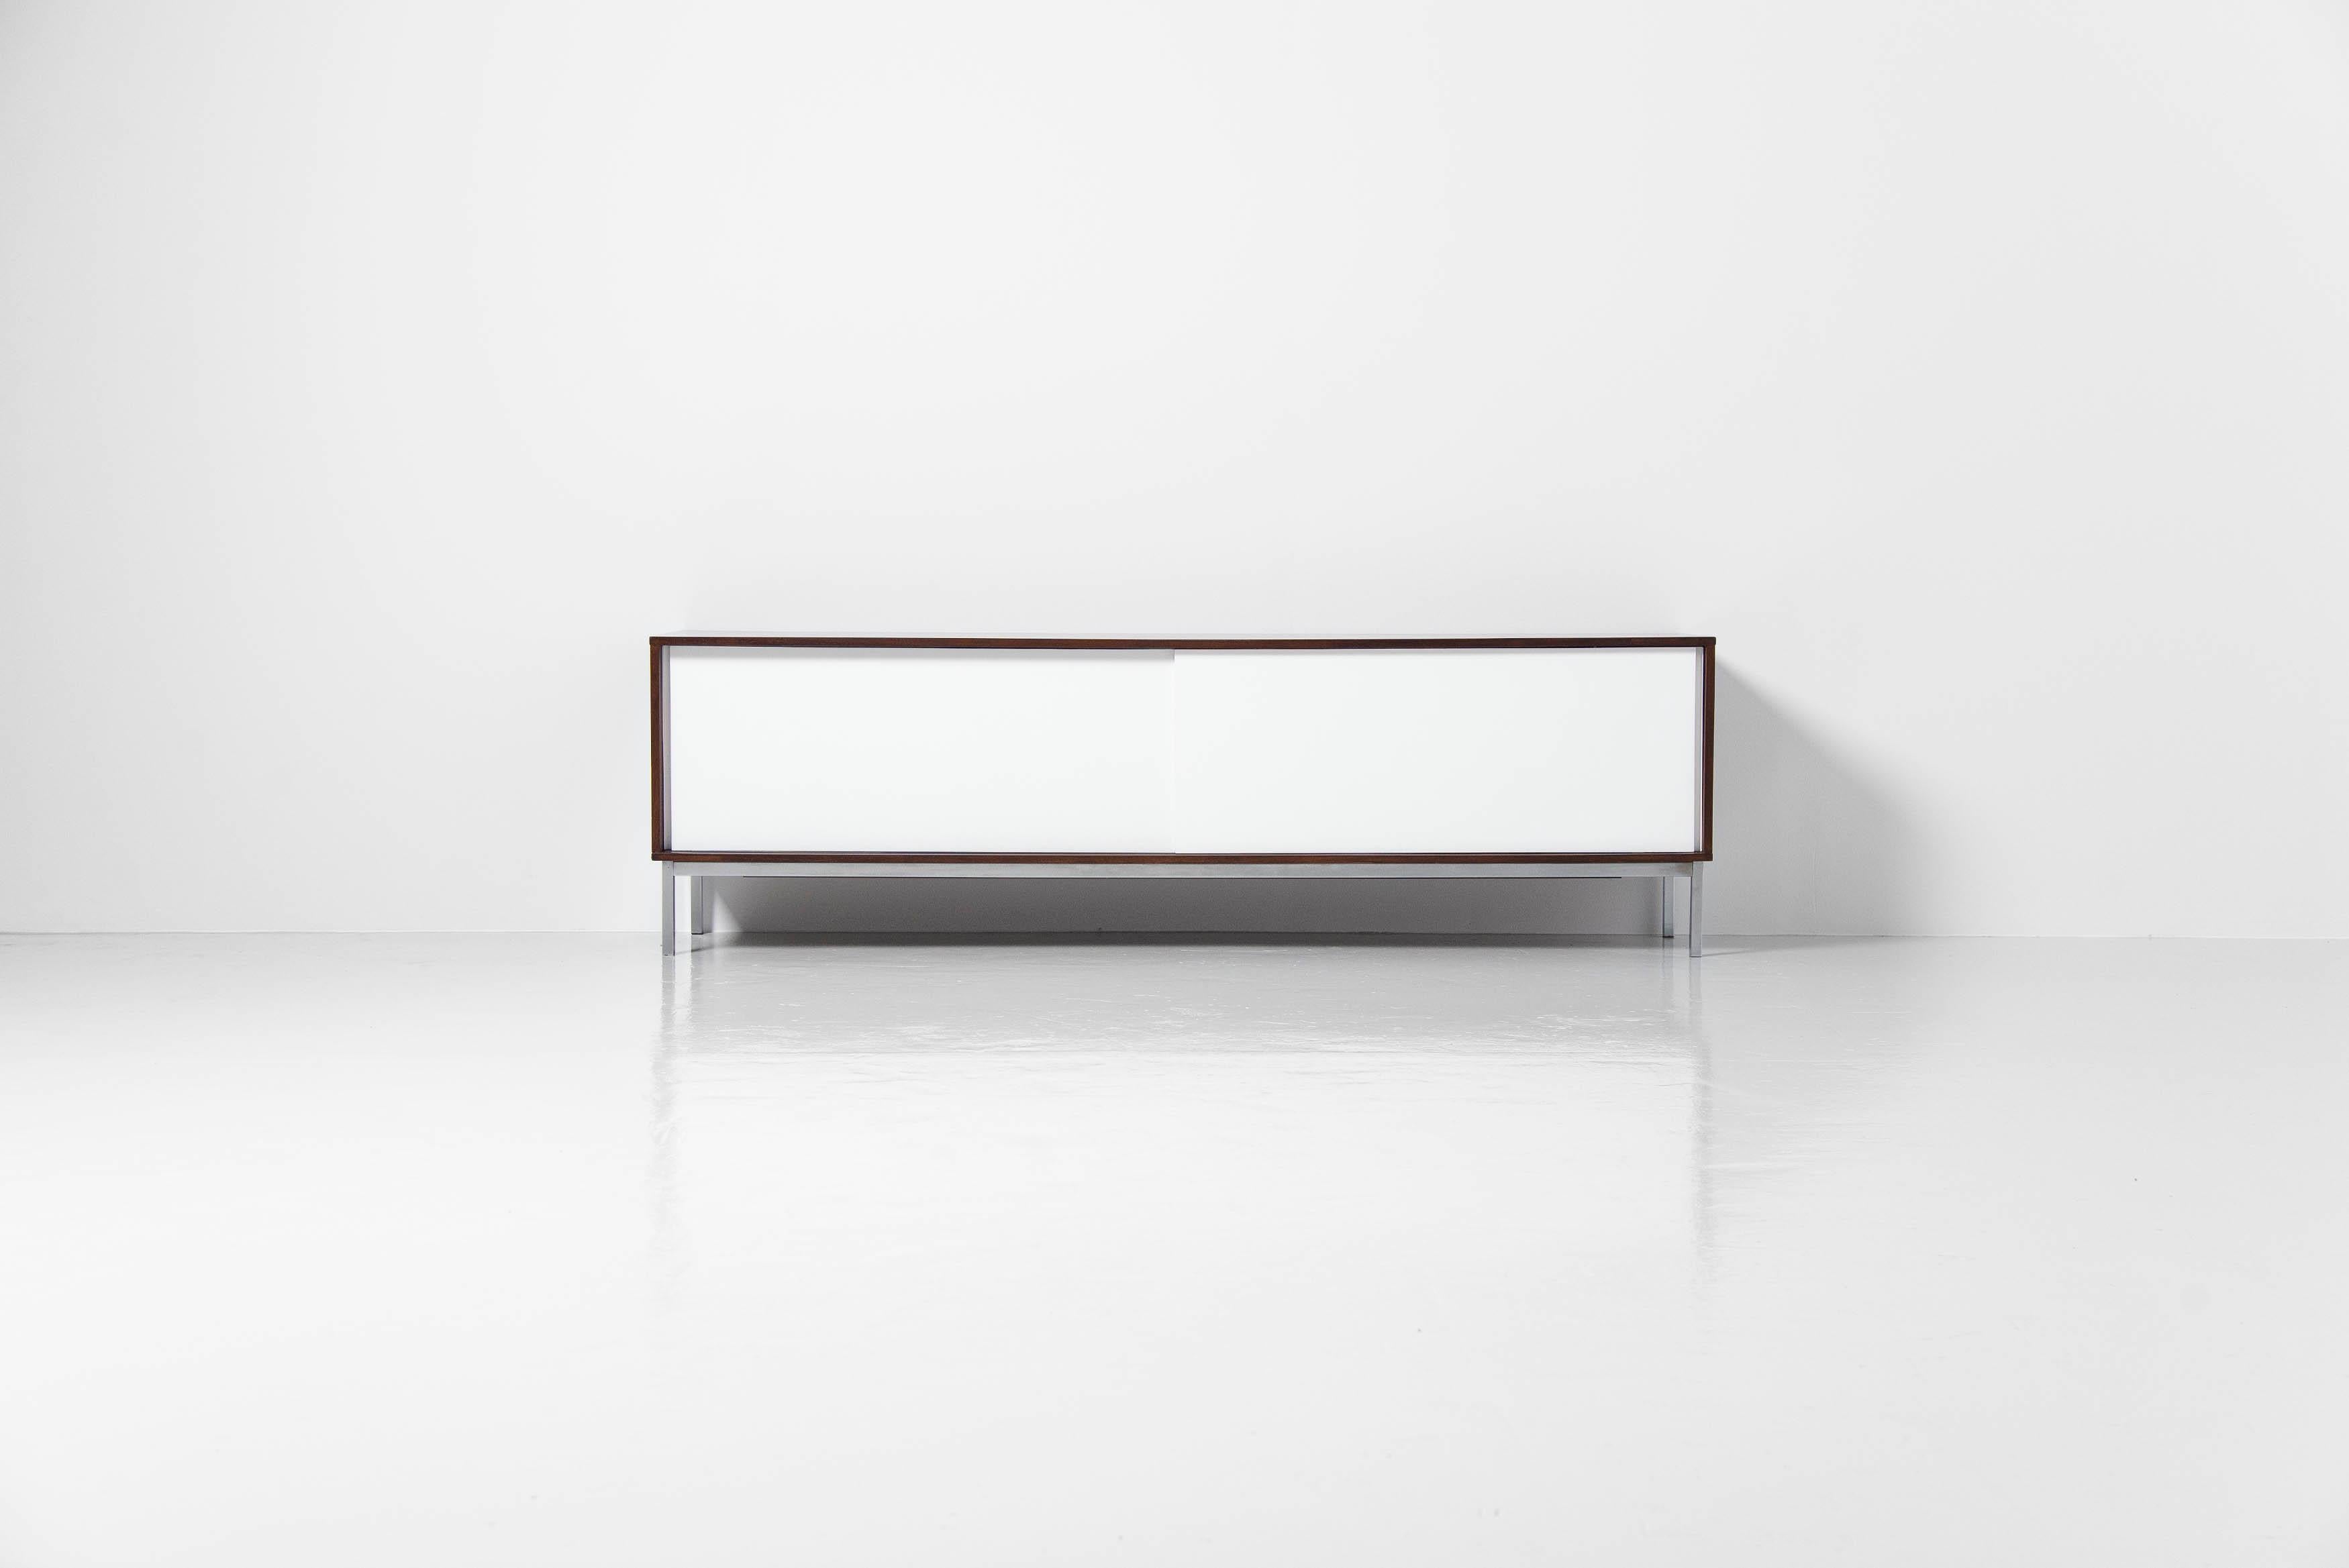 This is for a fantastic minimalist sideboard designed by Martin Visser and manufactured by ‘t Spectrum Bergeijk, produced between 1965 and 1971. The sideboard is in wenge wood and has white painted doors, with a matt chrome plated metal square